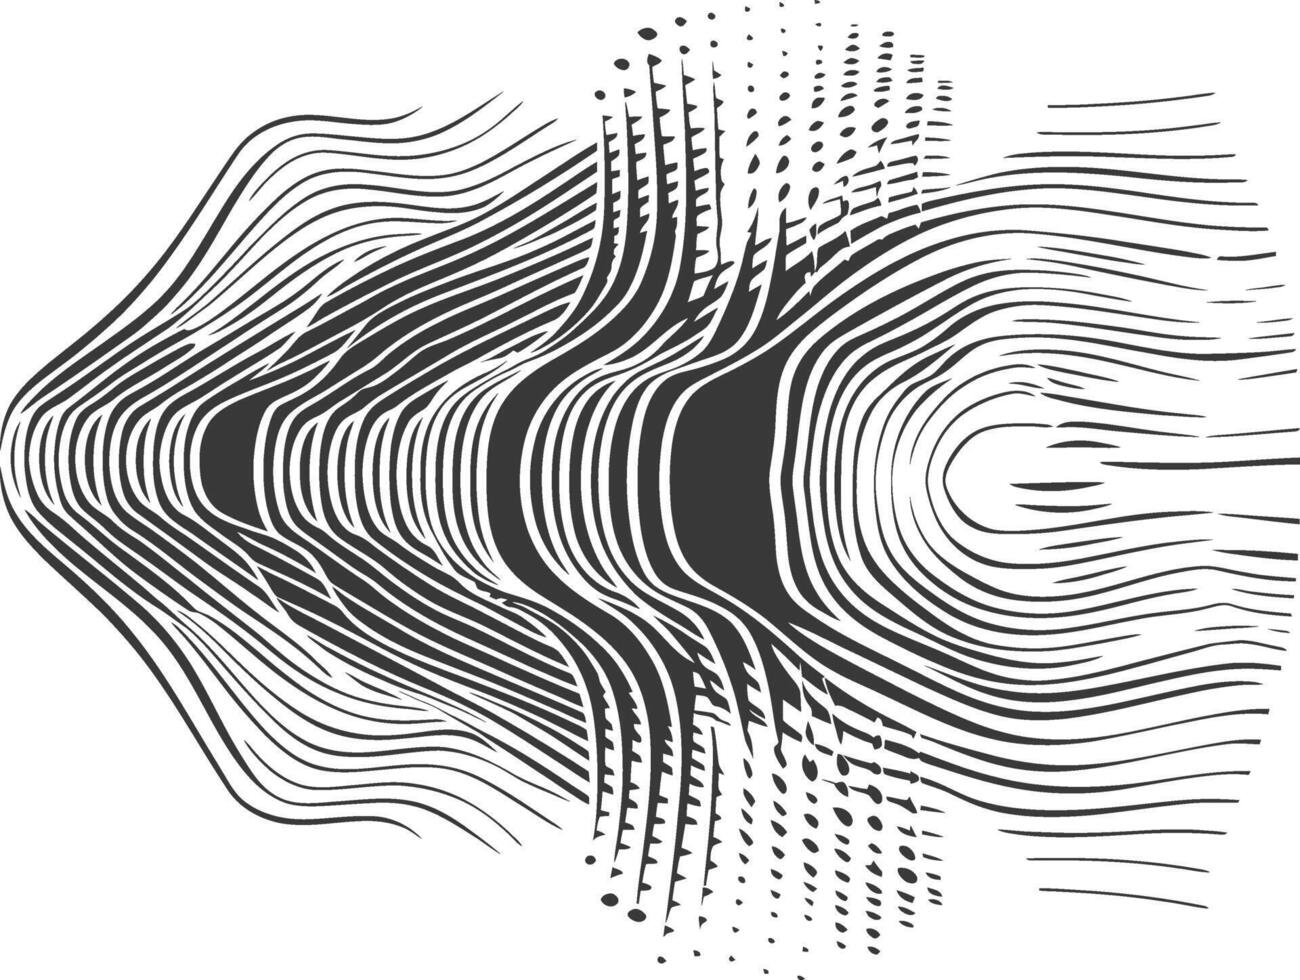 waving sound vibration and pulsing lines black color only vector